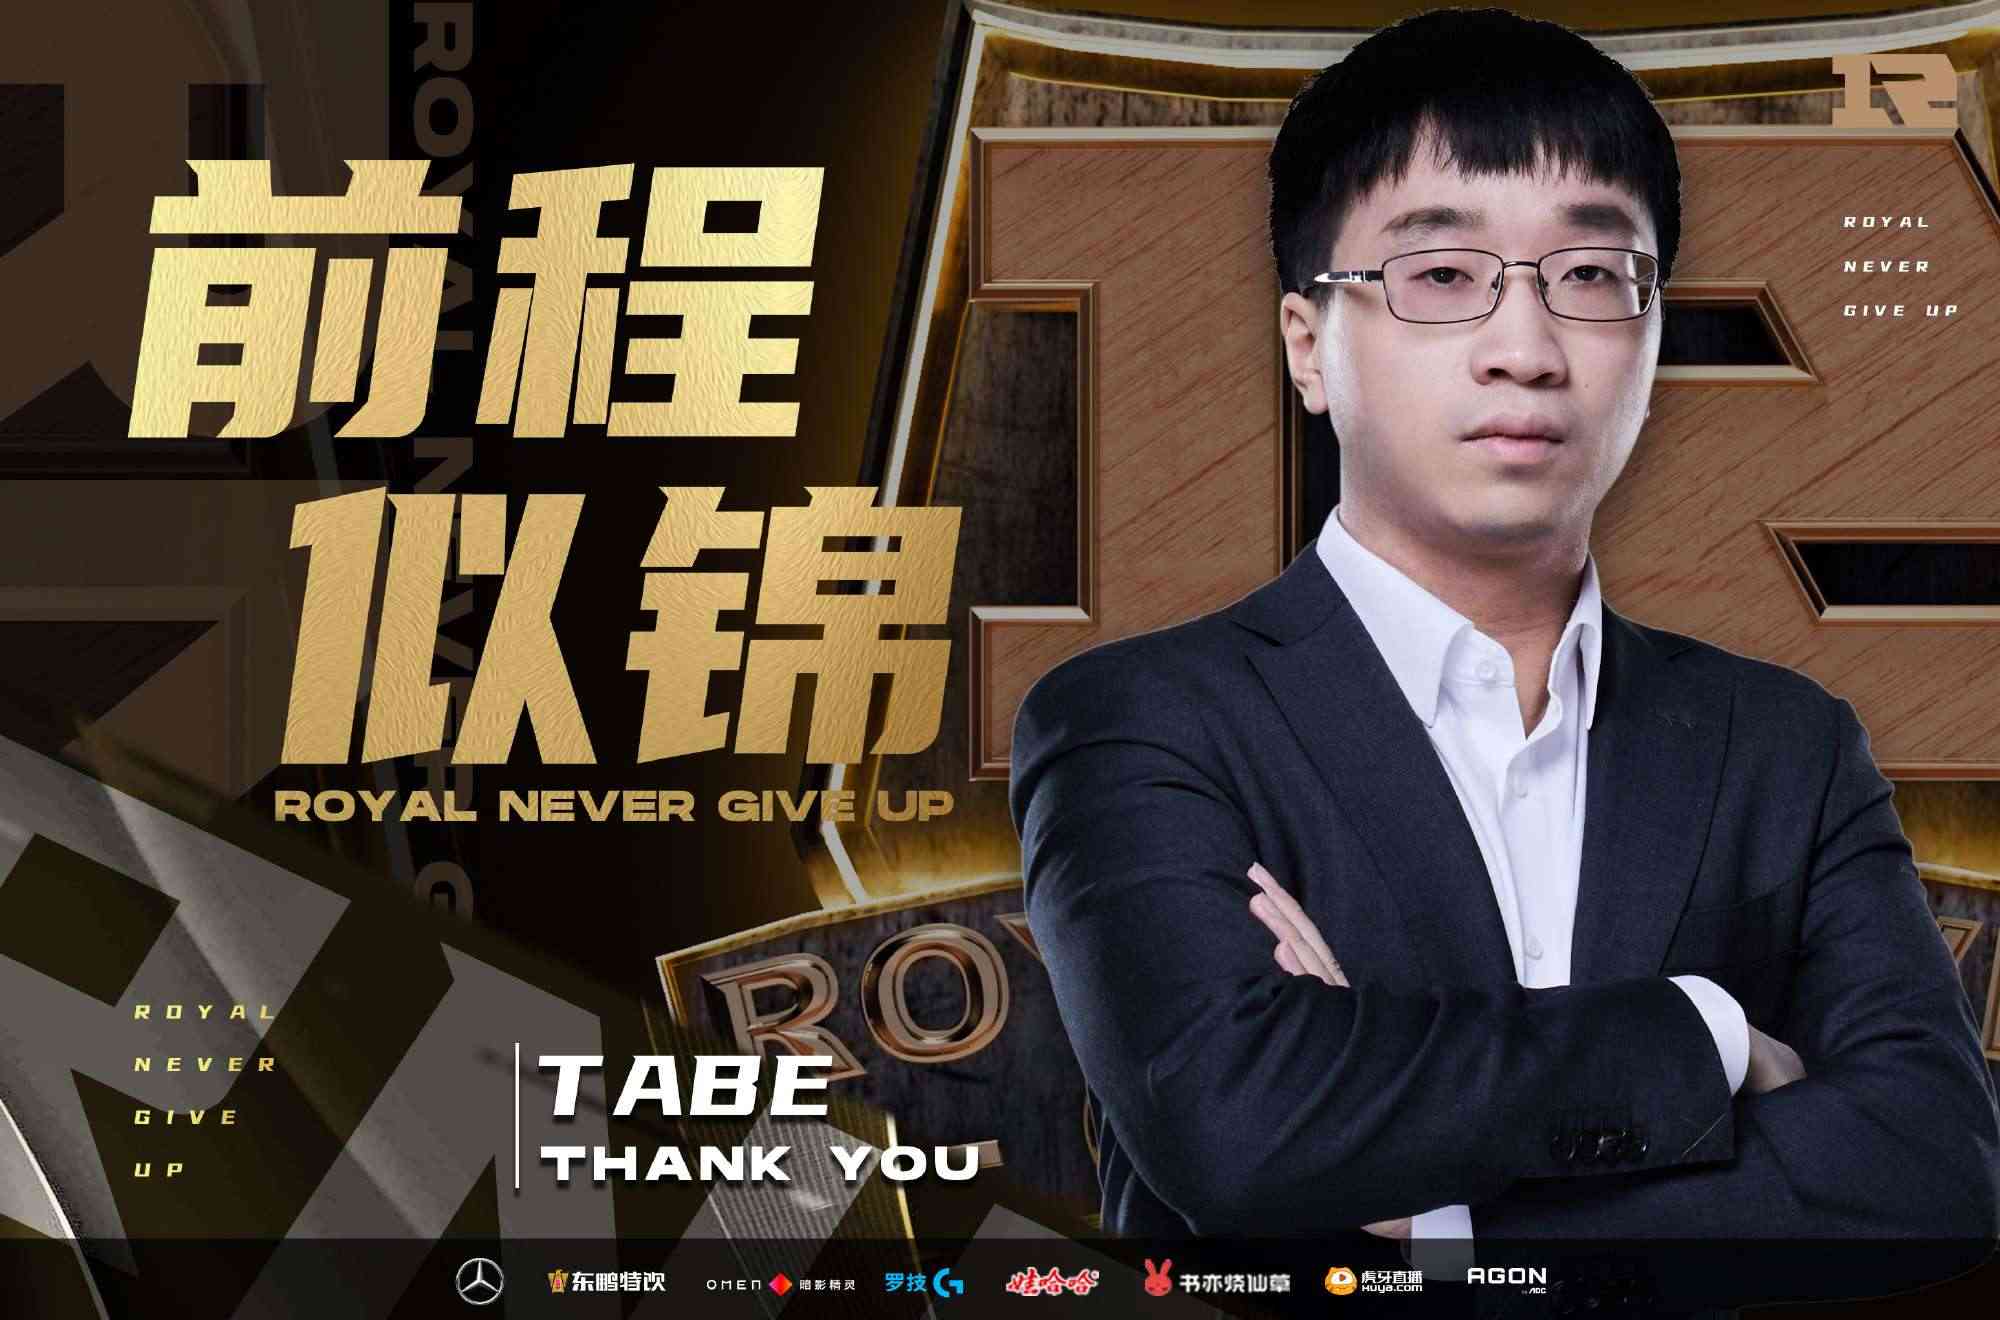 RNG bid farewell to head coach after losing 2 matches in a row in LPL Spring 2023